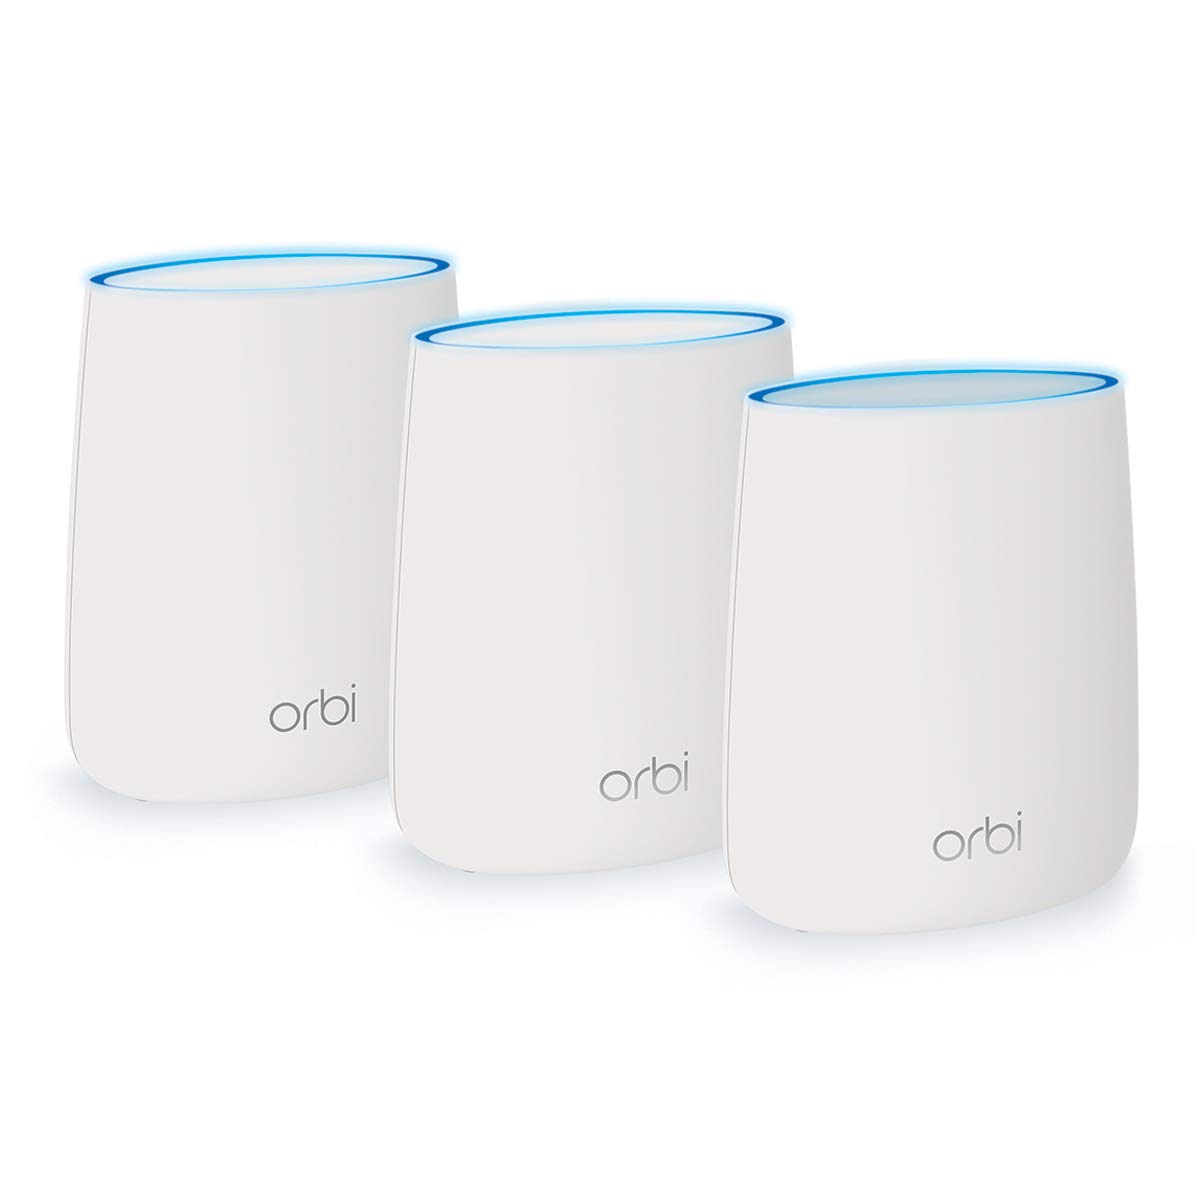 NETGEAR Orbi Tri-Band Whole Home Mesh WIFI System with 2.2Gbps Speed